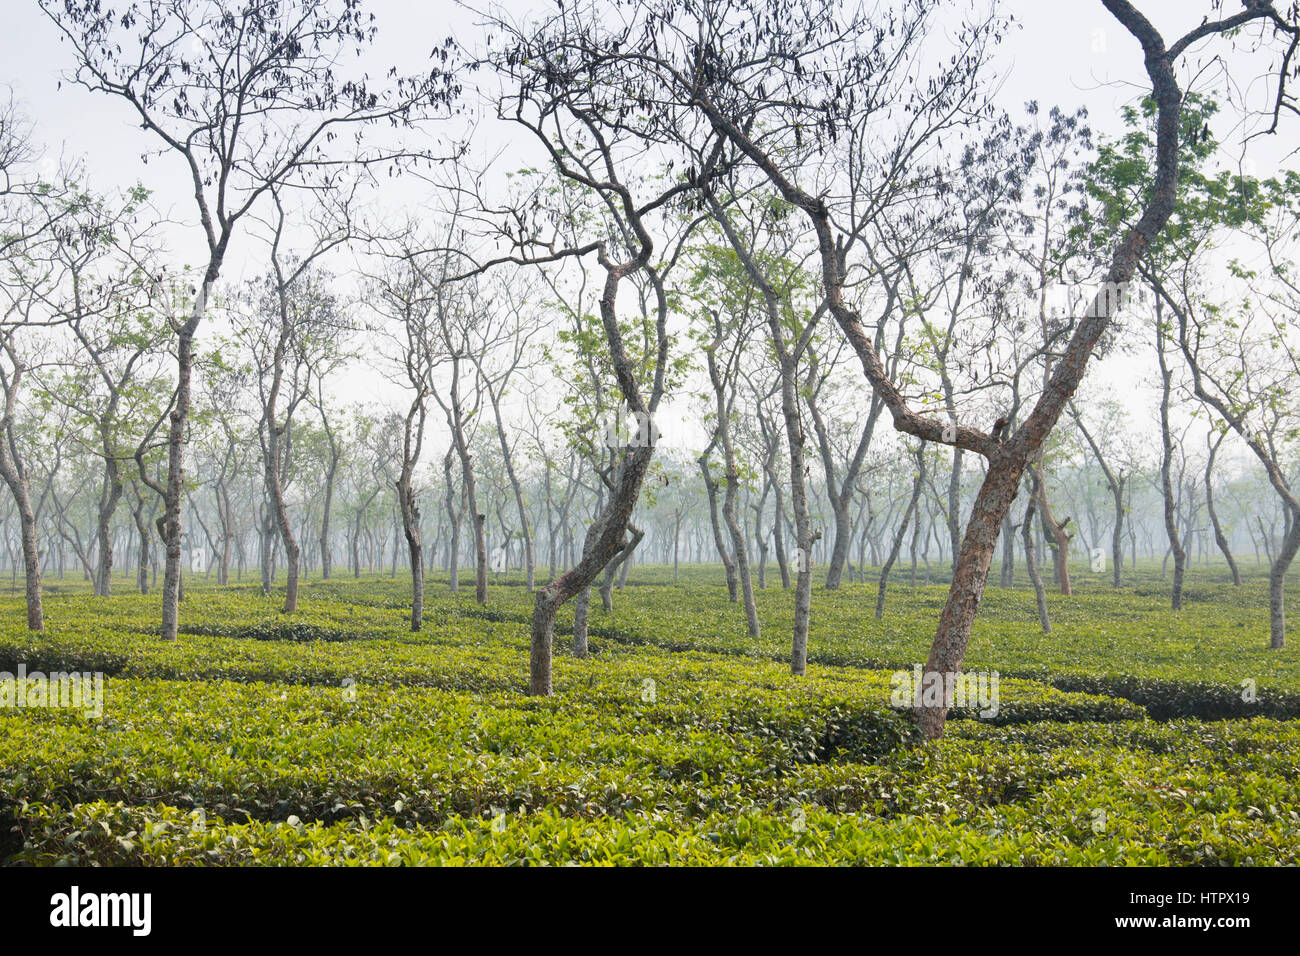 Tea fields in Srimangal in the Sylhet division of Bangladesh Stock Photo